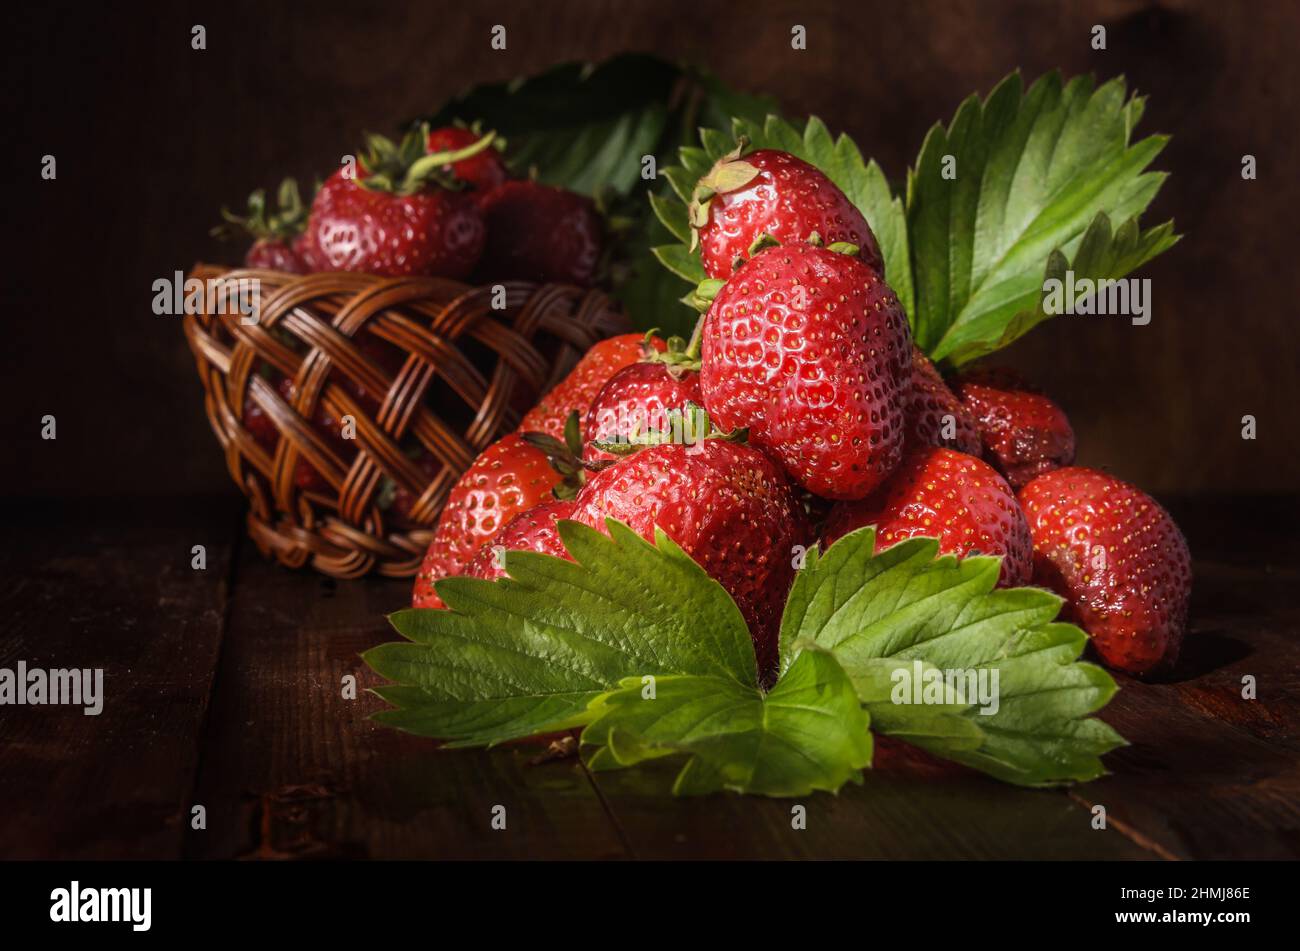 berries of ripe strawberries on a dark wooden background in a rustic style Stock Photo